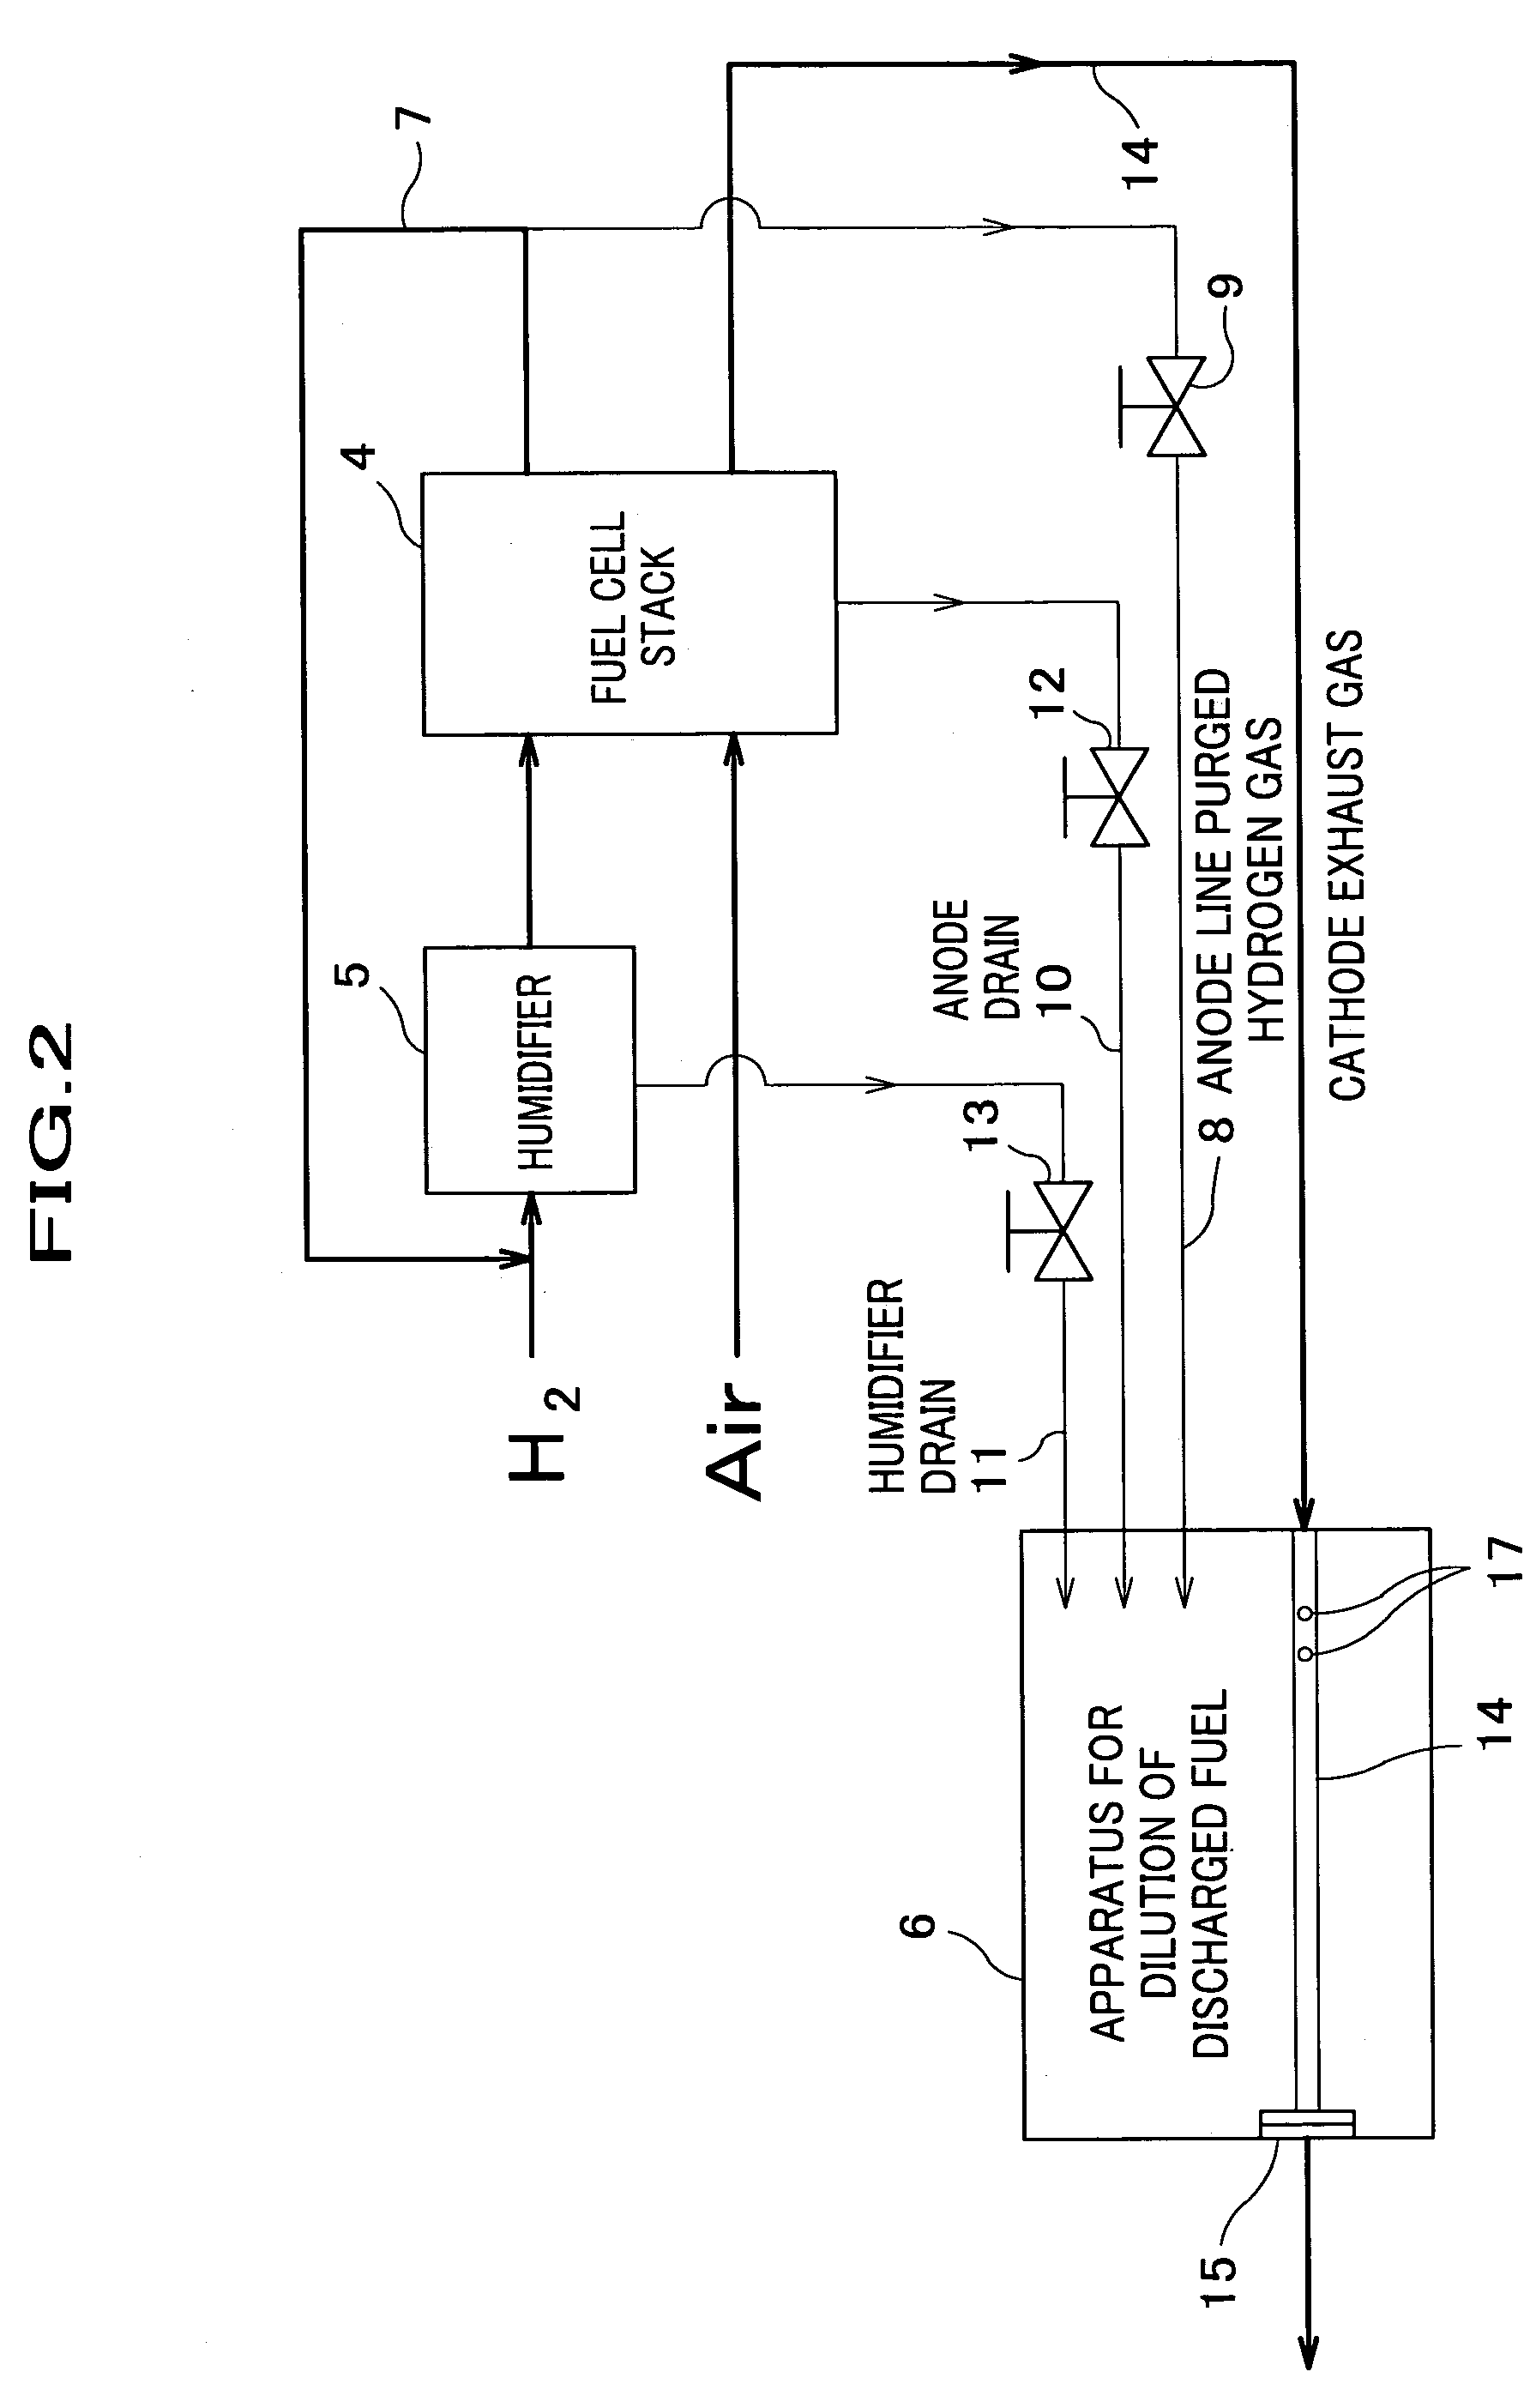 Apparatus for dilution of discharged fuel